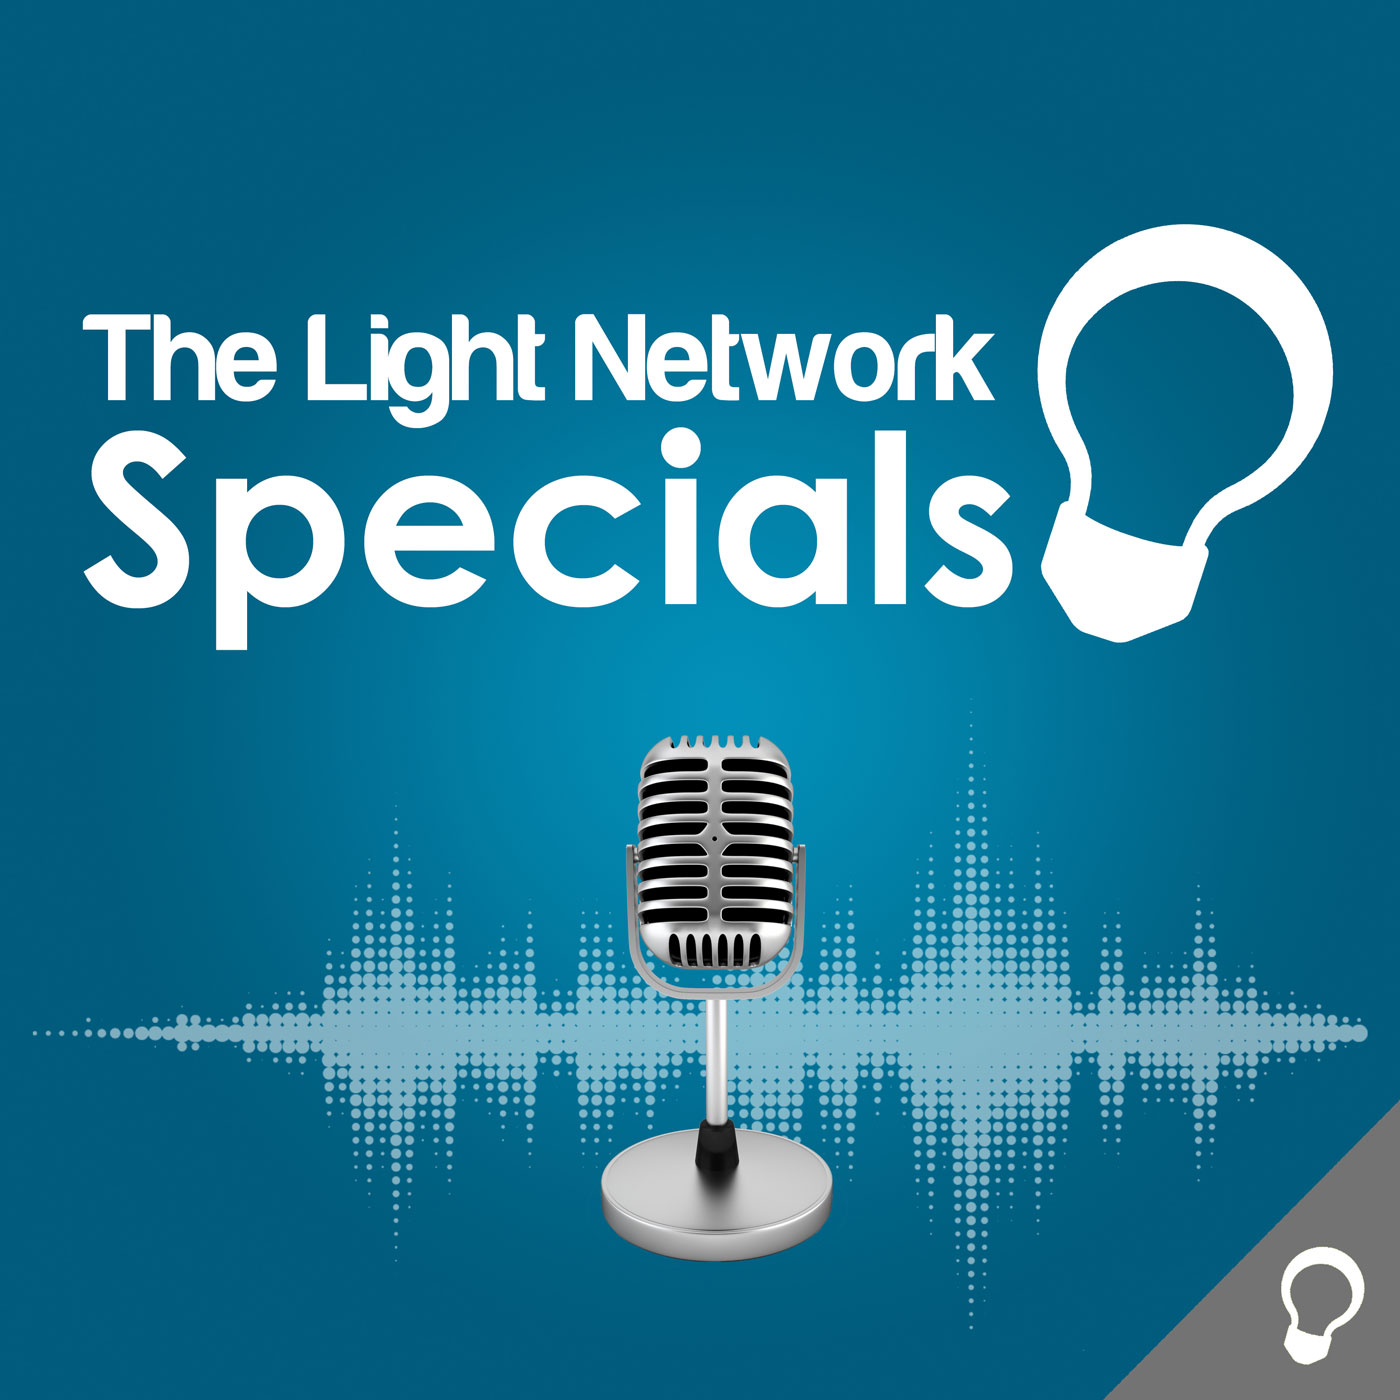 The Light Network Specials 009: “Dewayne Bryant Talks About His New Podcast”